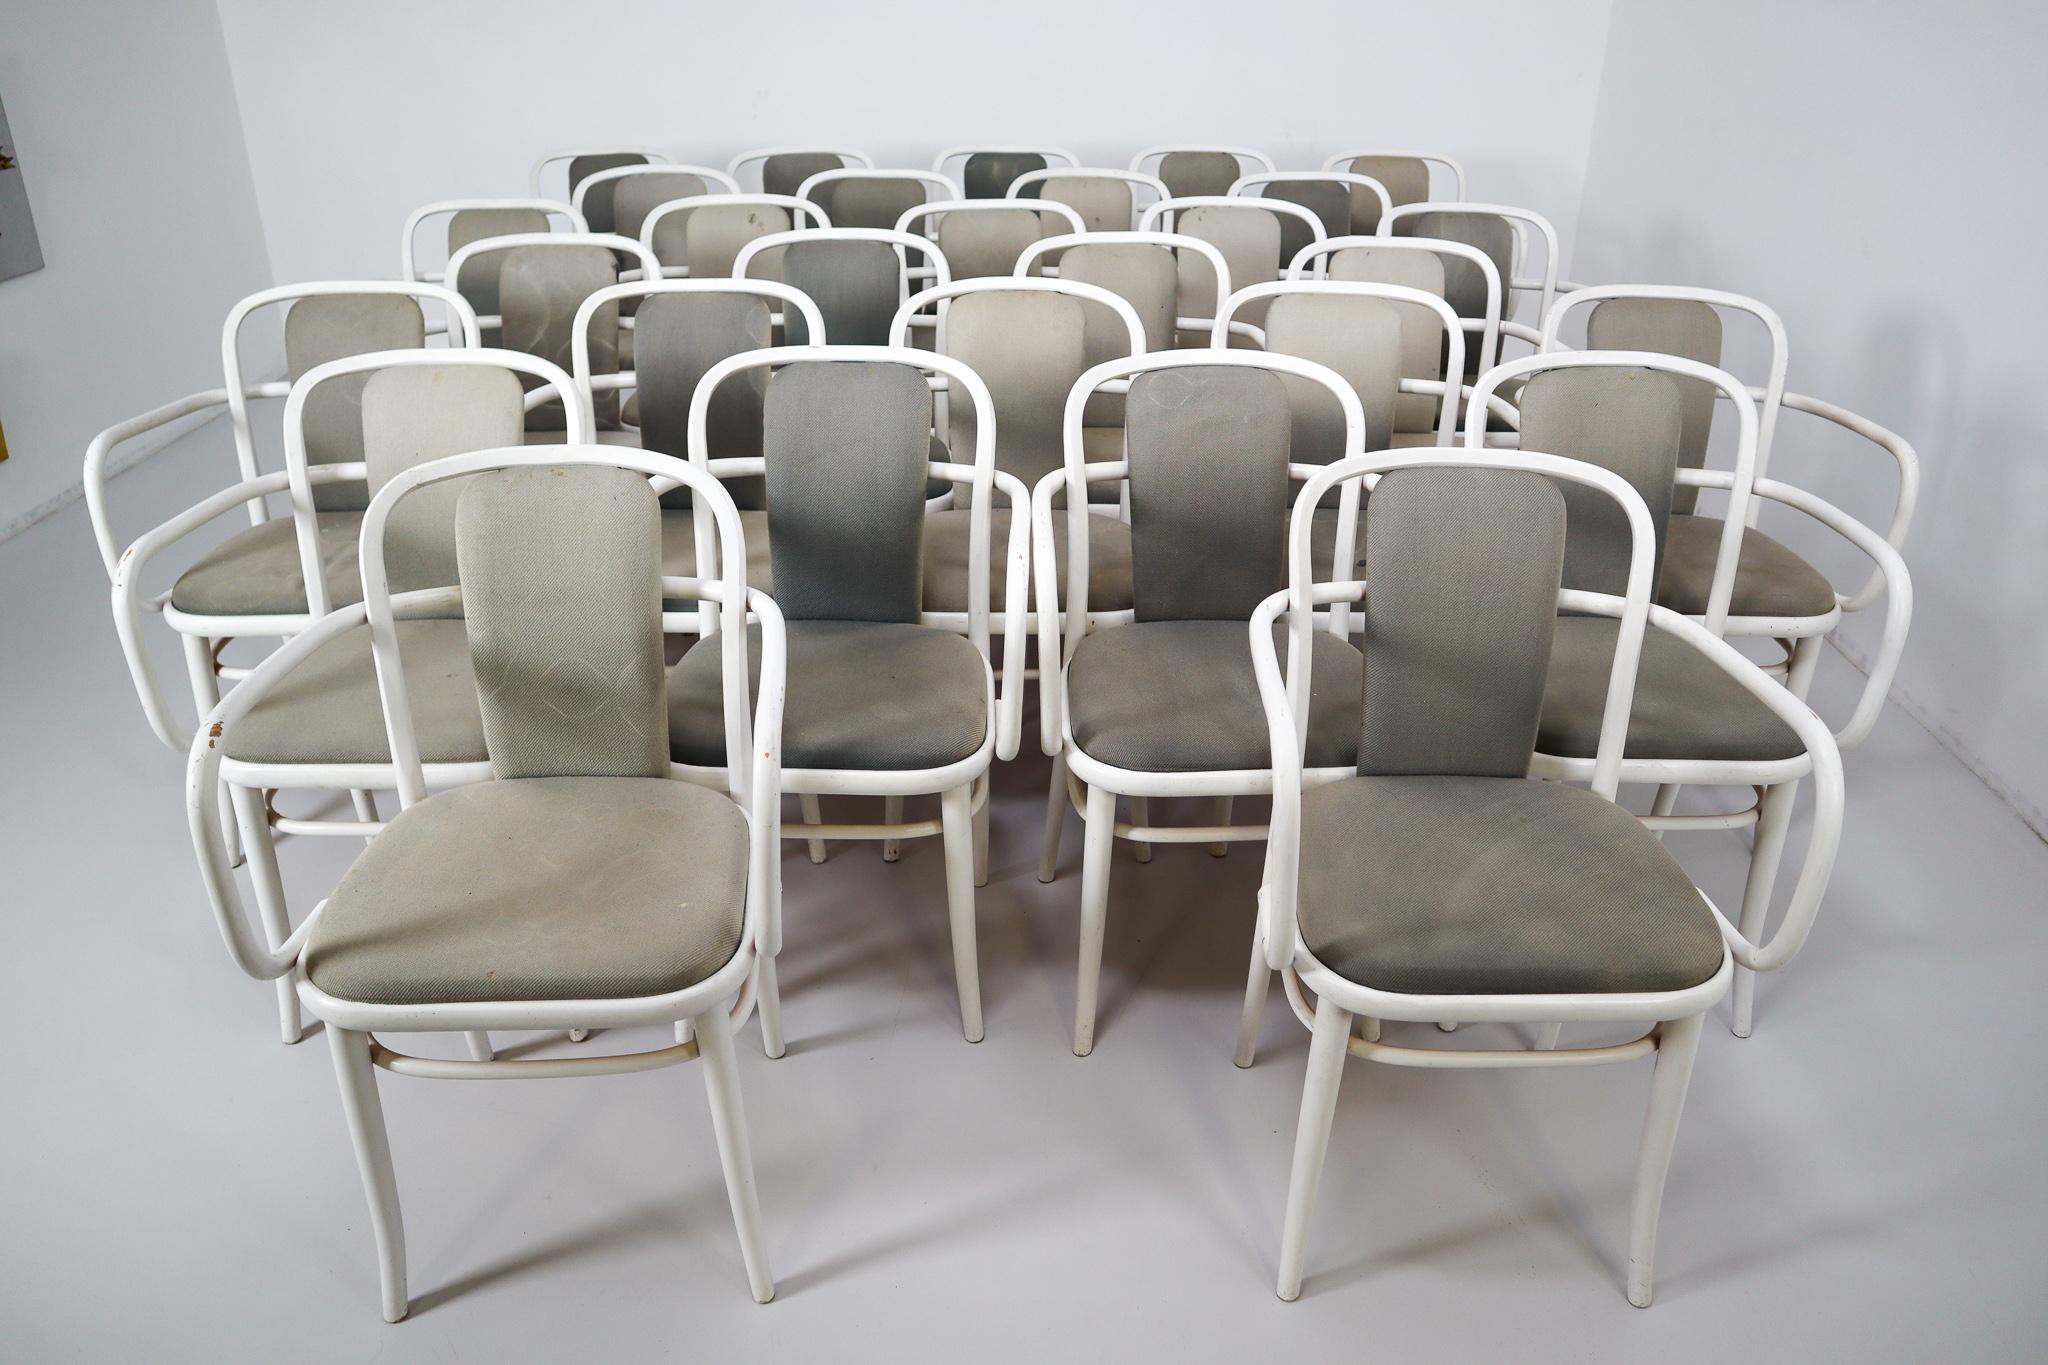 These chairs have a simplistic design and is more modest model of Ton, they are made from painted white bentwood and a grey fabric. The main personality behind the establishment of the world-famous company producing bent furniture was the ingenious